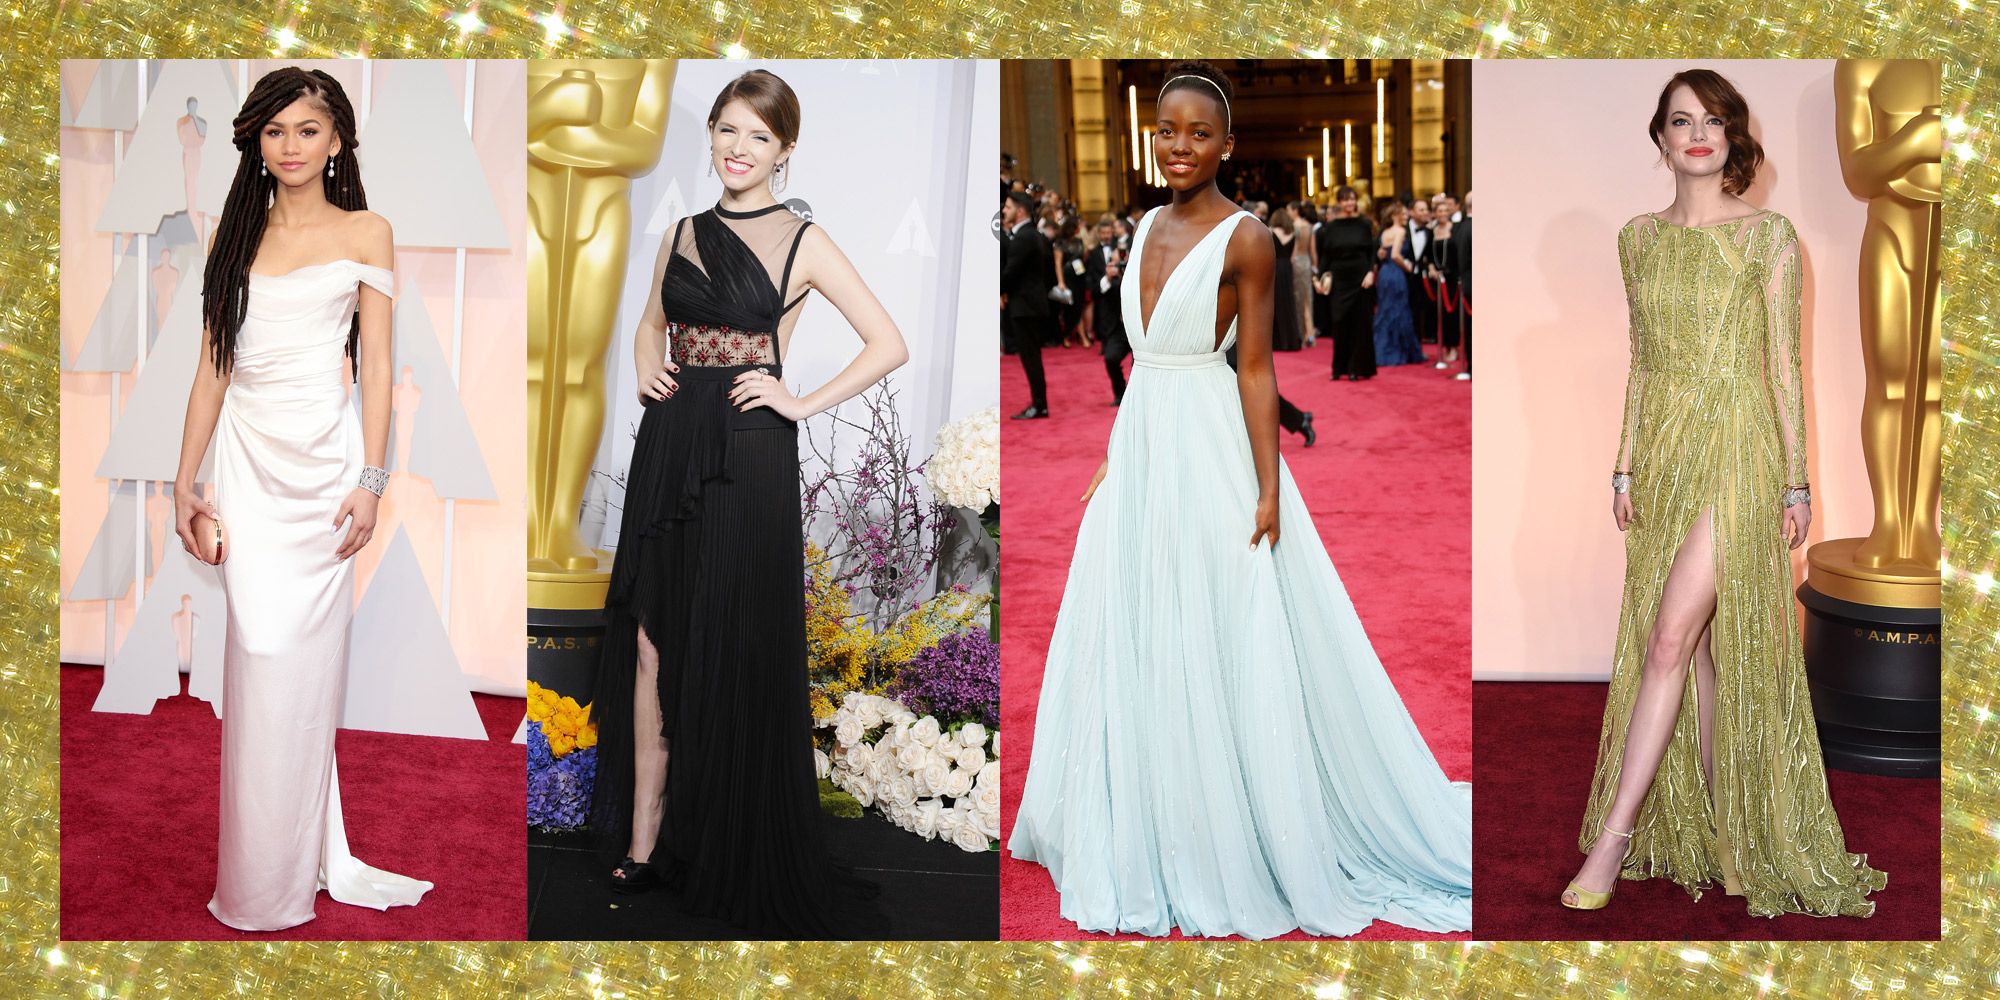 How to channel the best Oscar dresses at your wedding! - FASHION Magazine